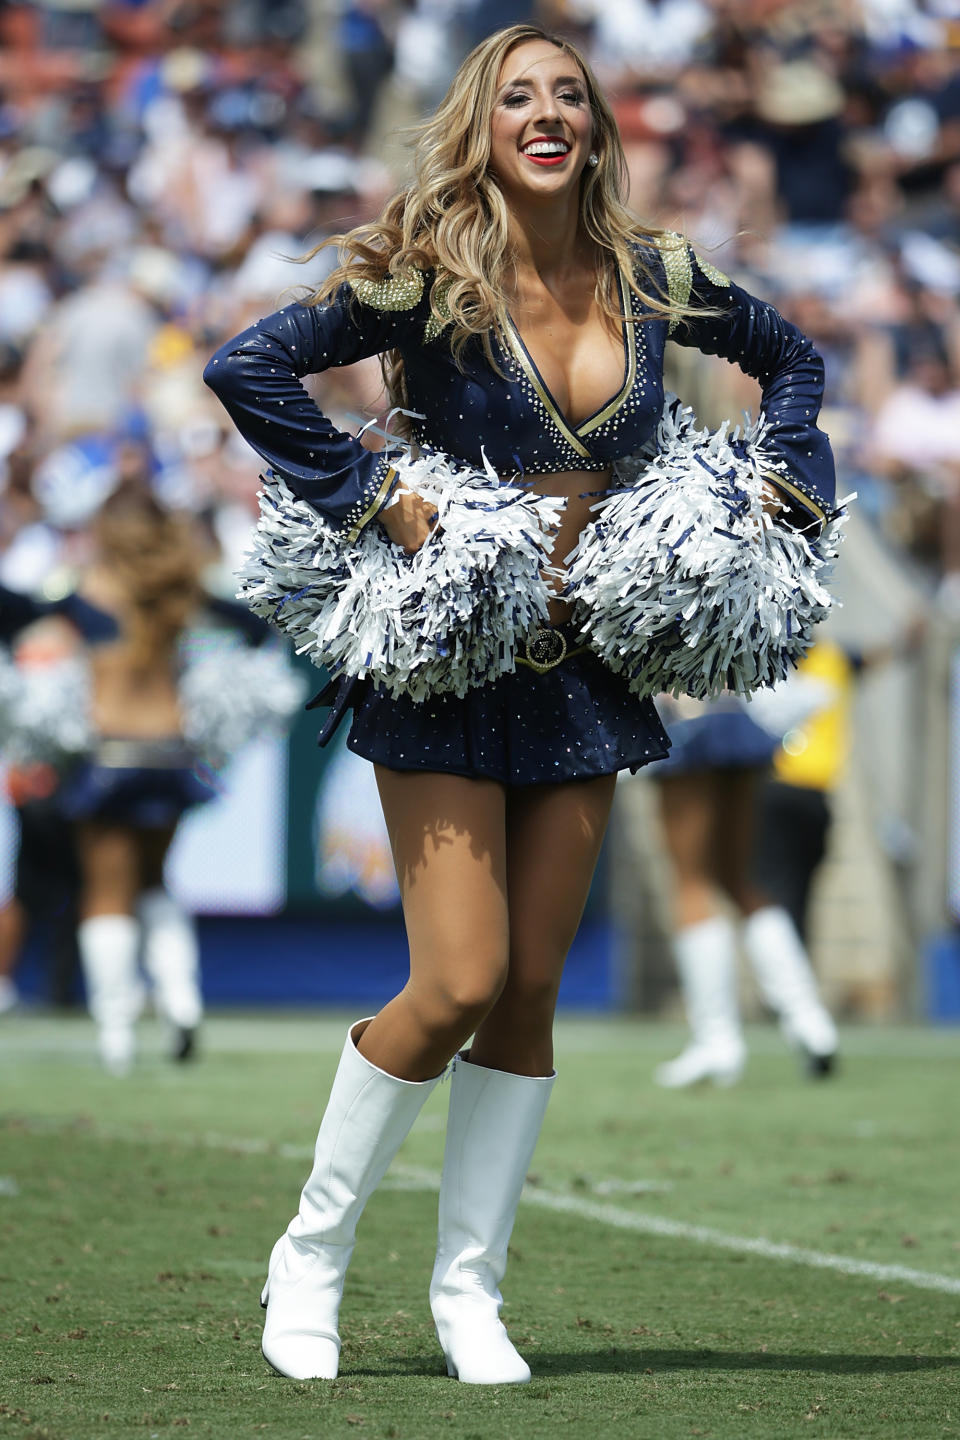 <p>The Los Angeles Rams Cheerleaders perform during the game against the Indianapolis Colts at Los Angeles Memorial Coliseum on September 10, 2017 in Los Angeles, California. (Photo by Jeff Gross/Getty Images) </p>